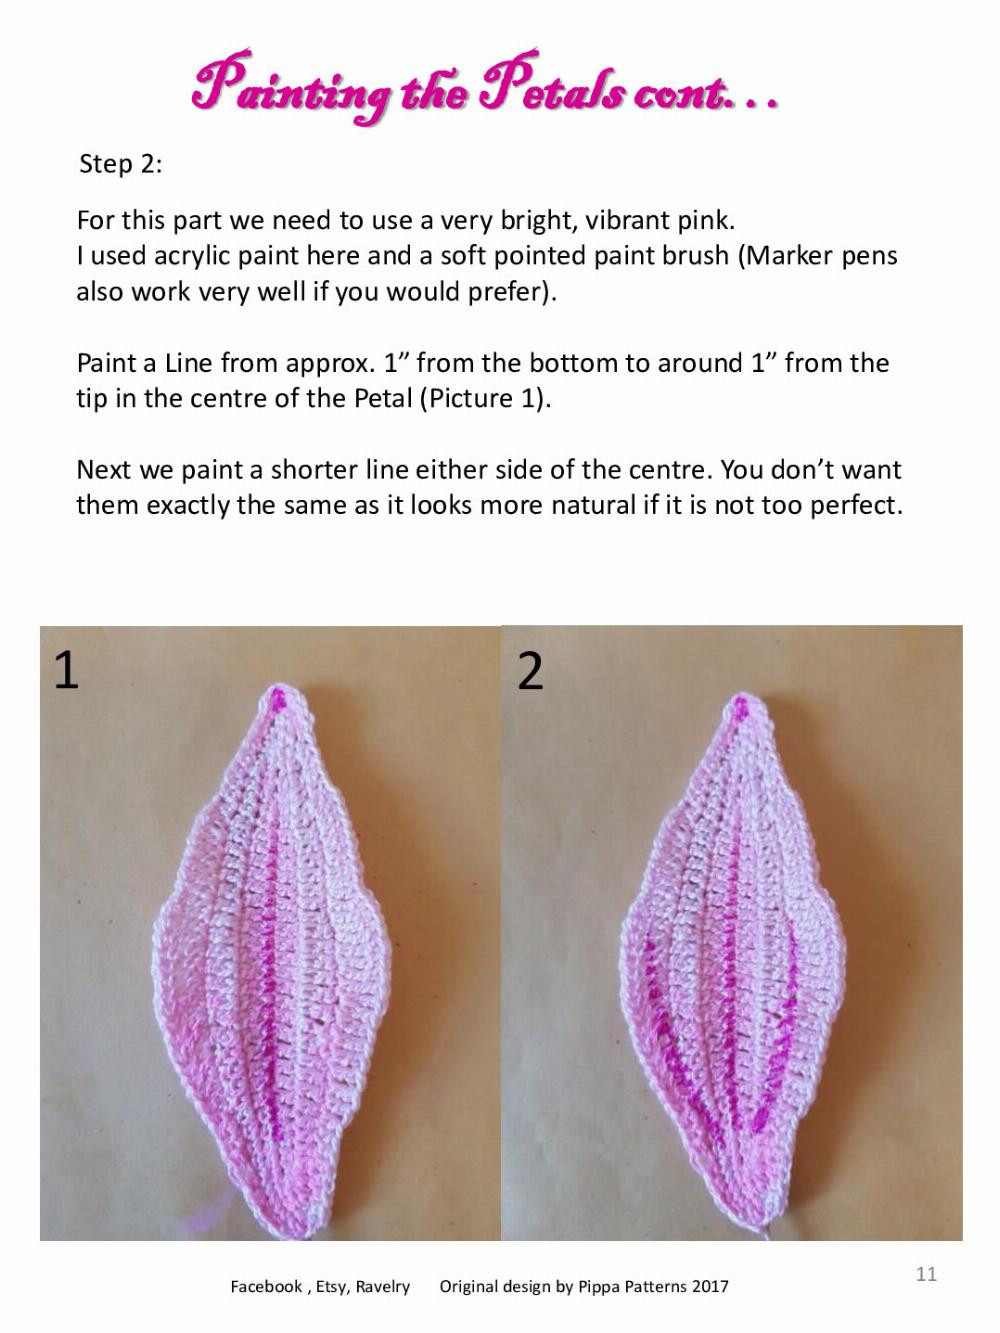 Pink Tiger Lily Pattern and instructions